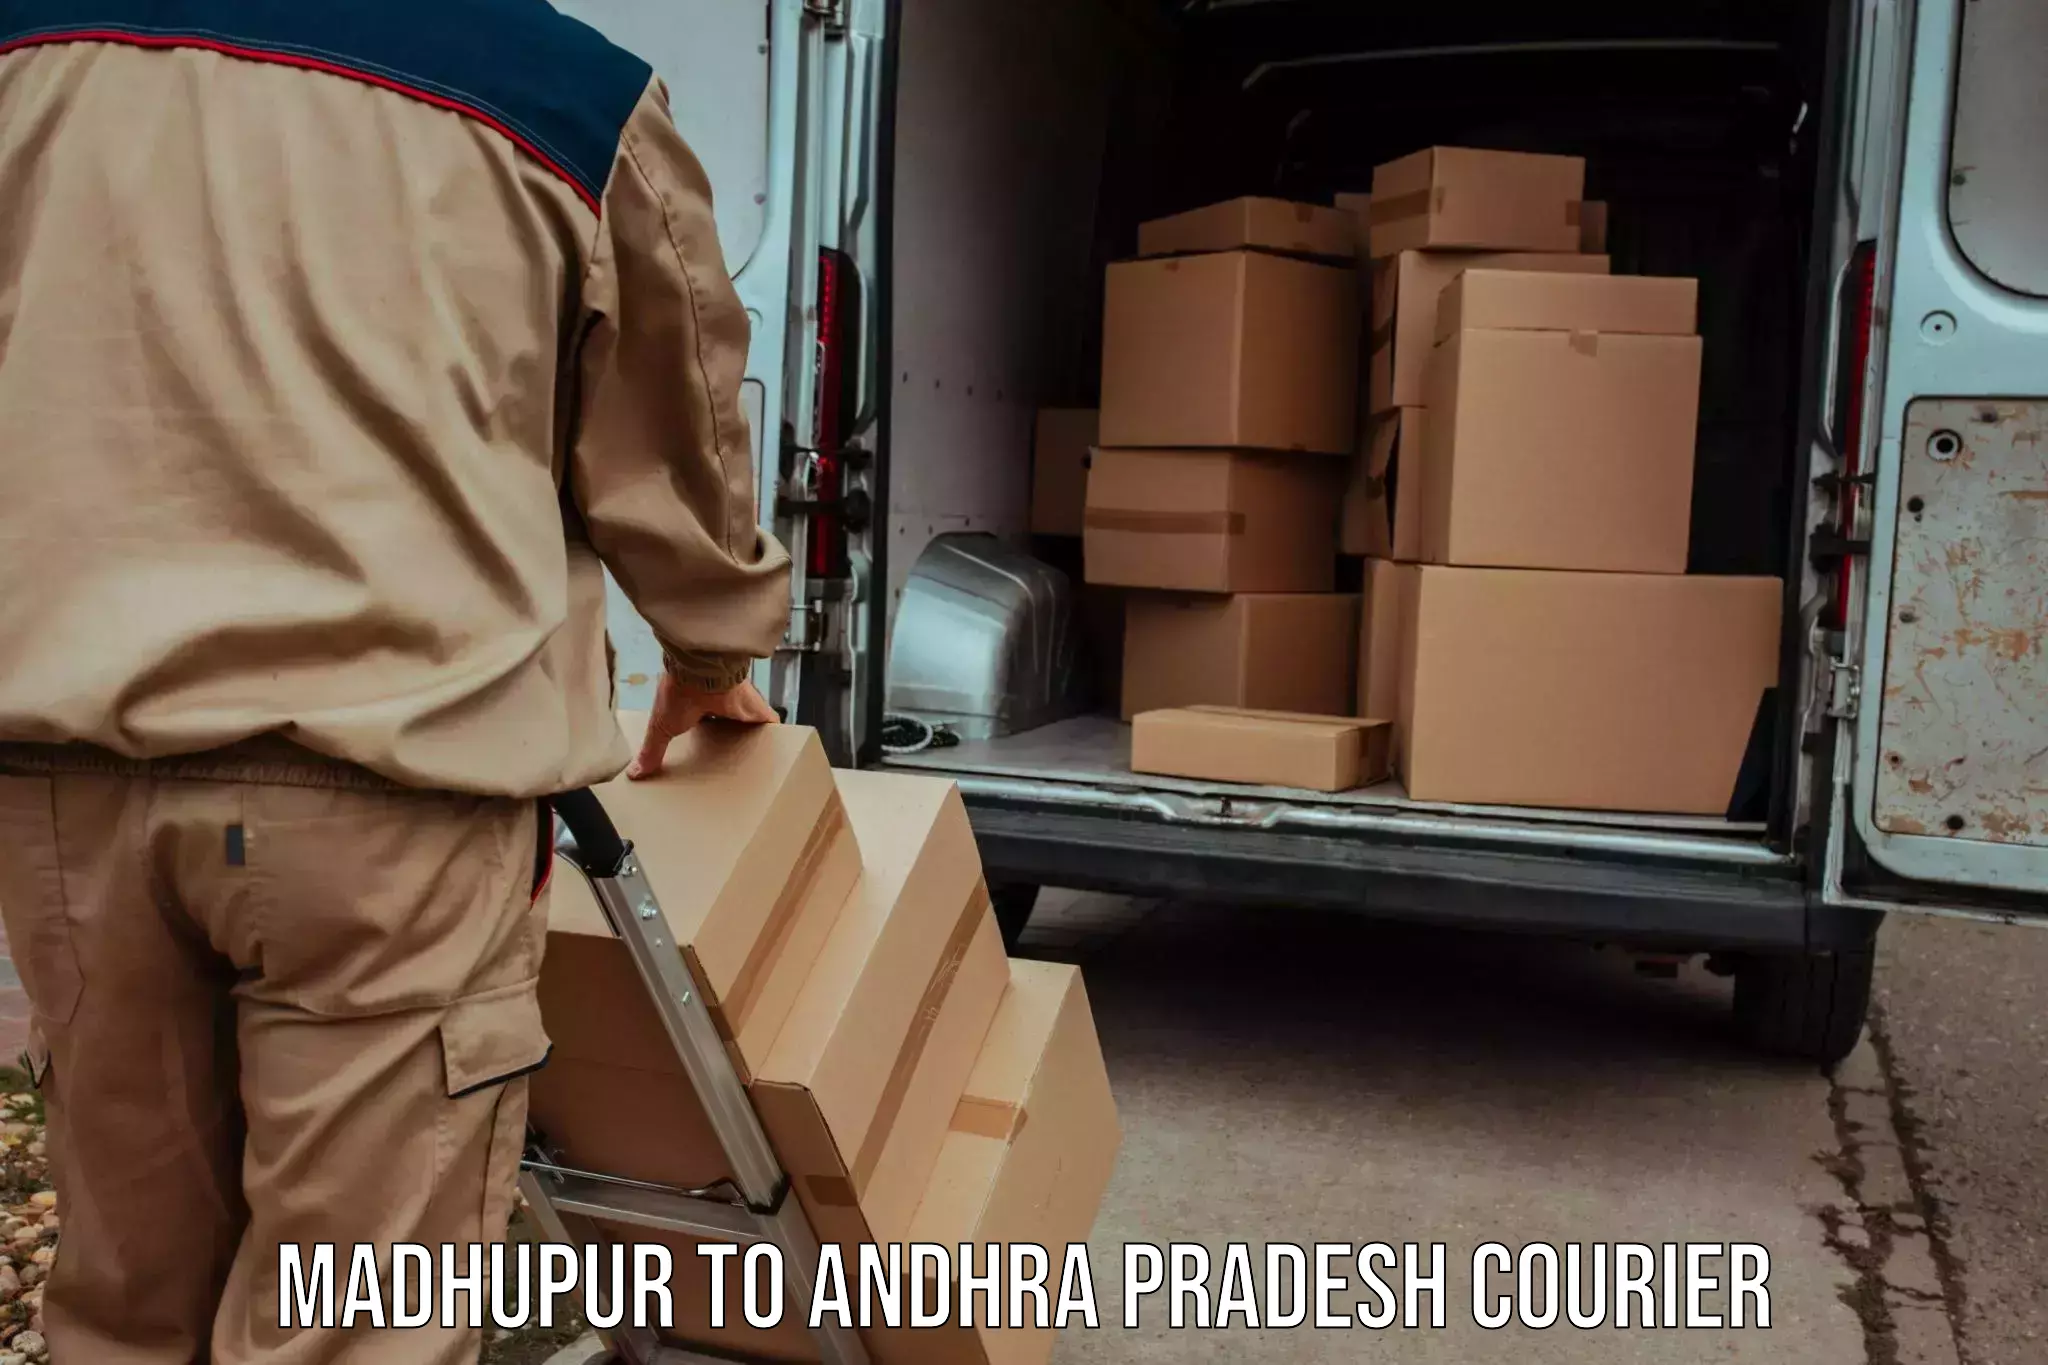 User-friendly delivery service Madhupur to Chandragiri